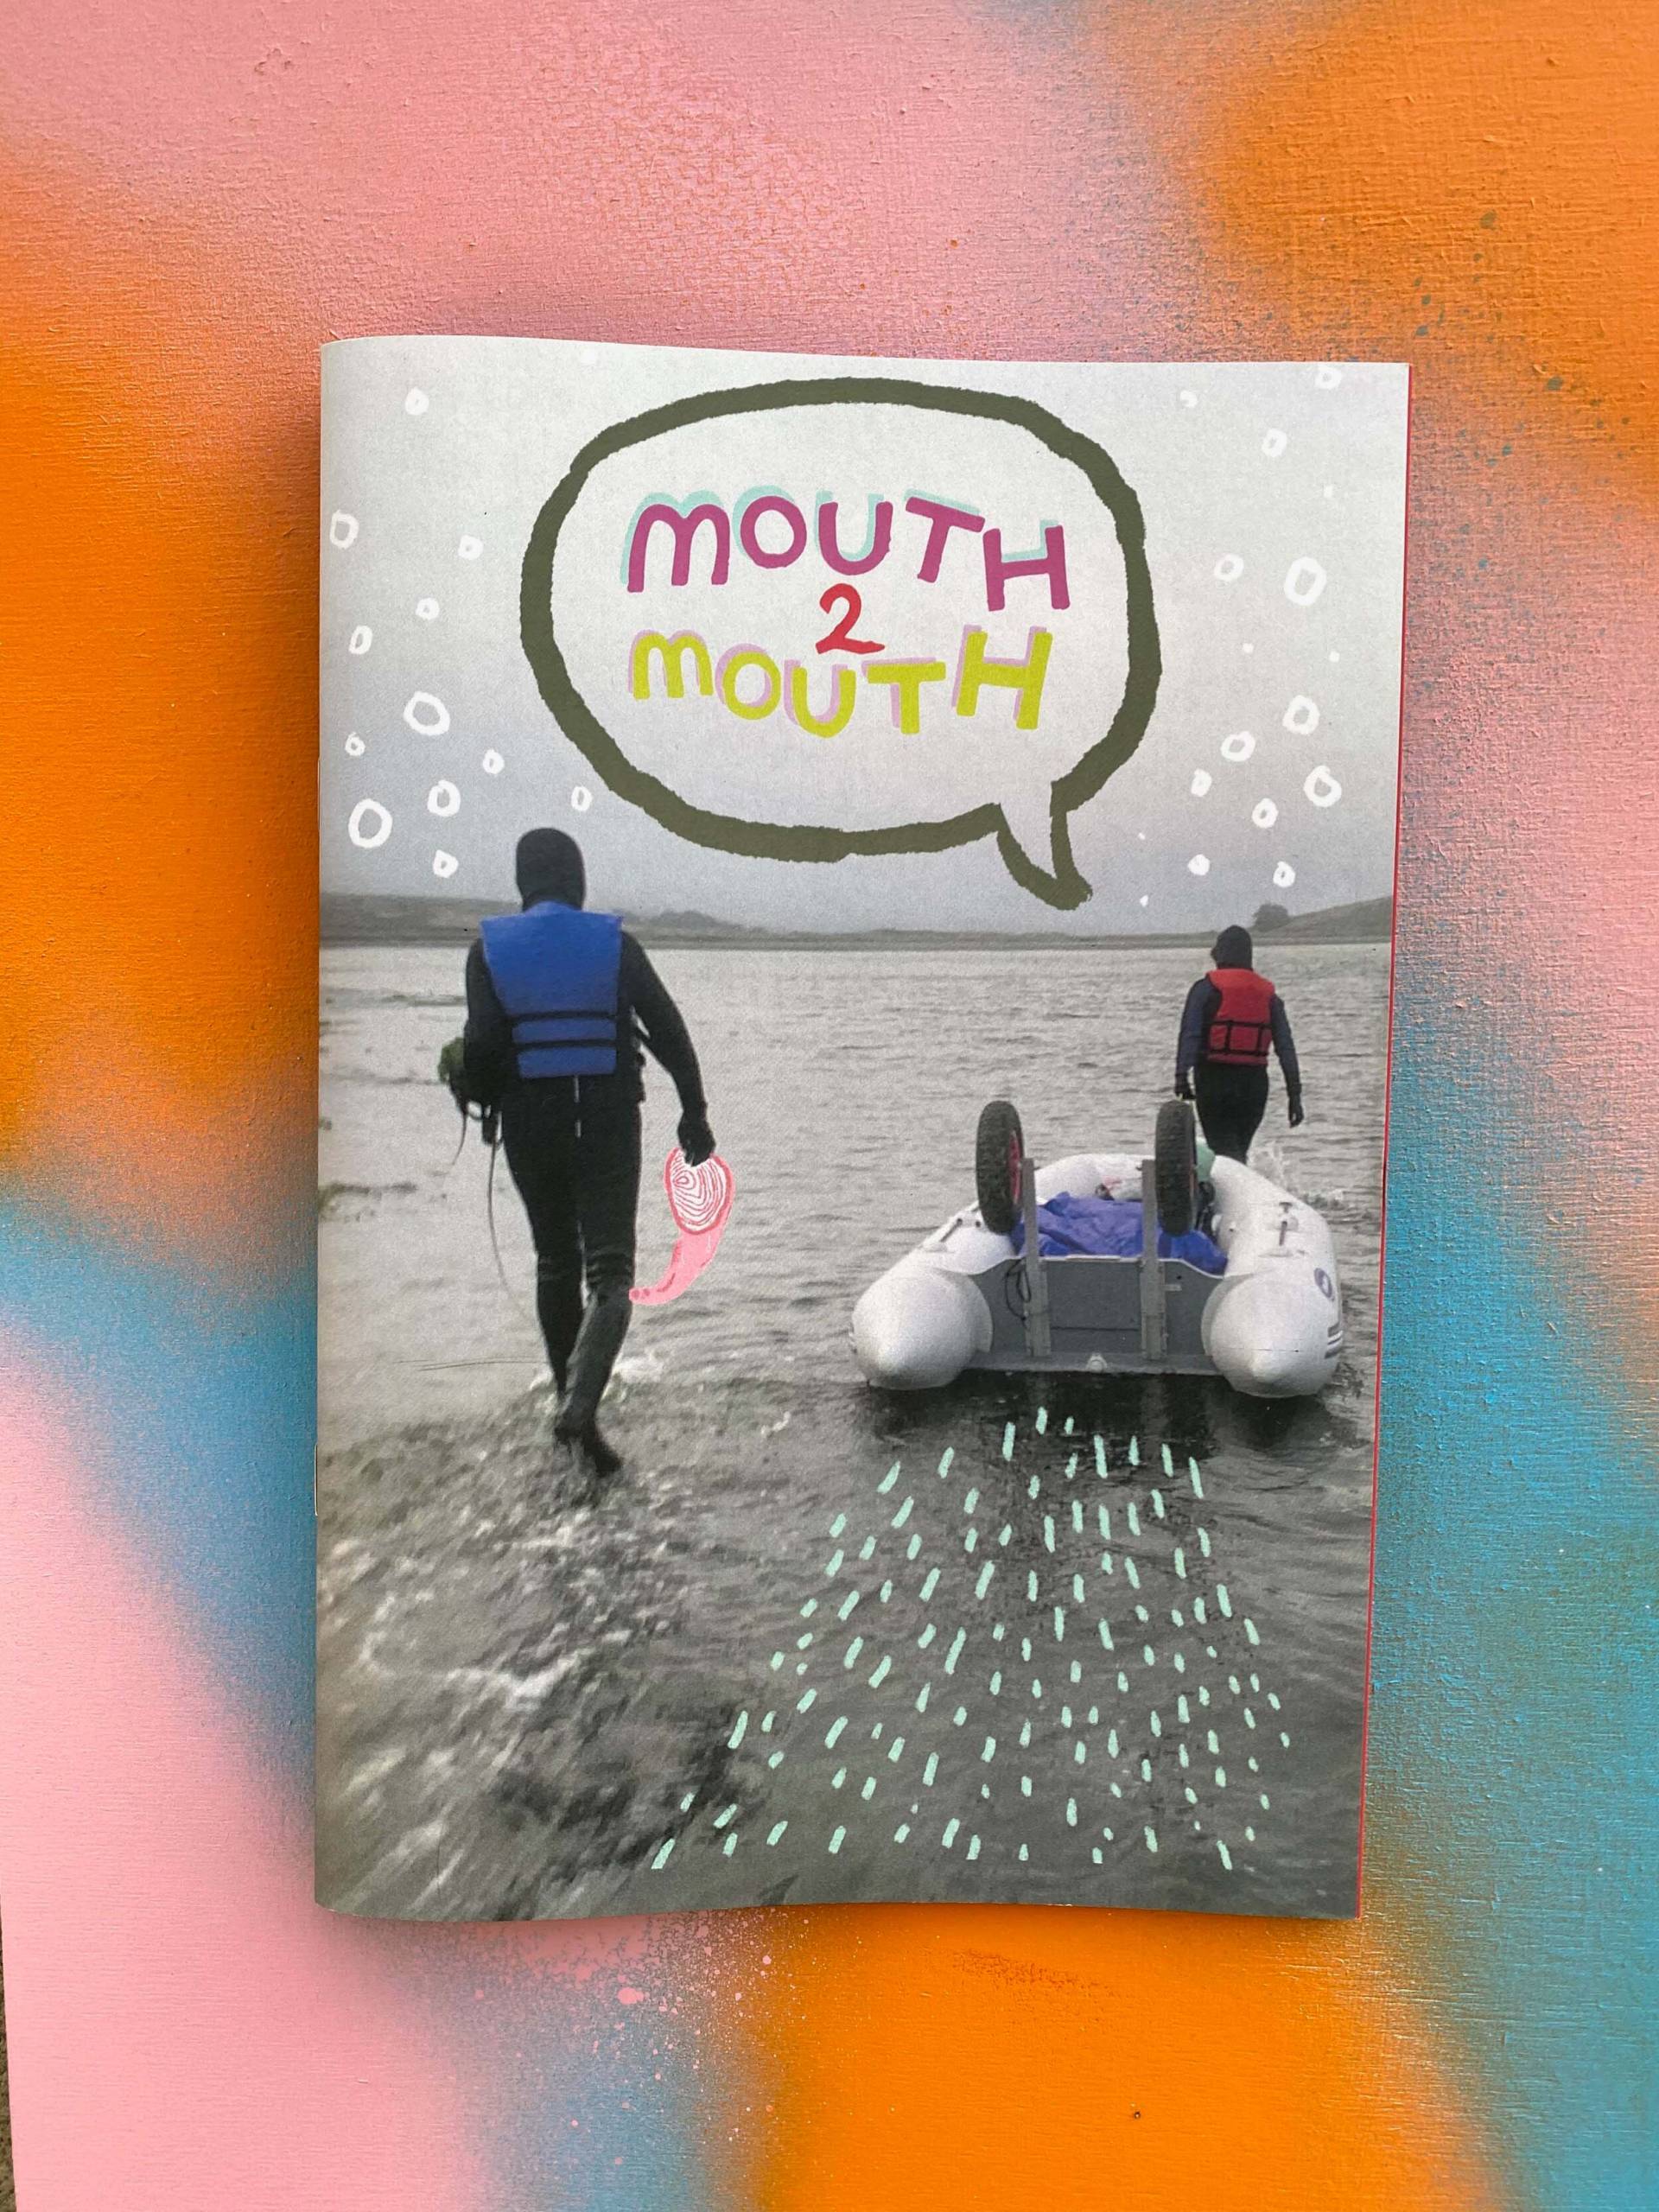 The cover of the Mouth2Mouth zine, with a photo illustration of two women in wetsuits digging for clams.